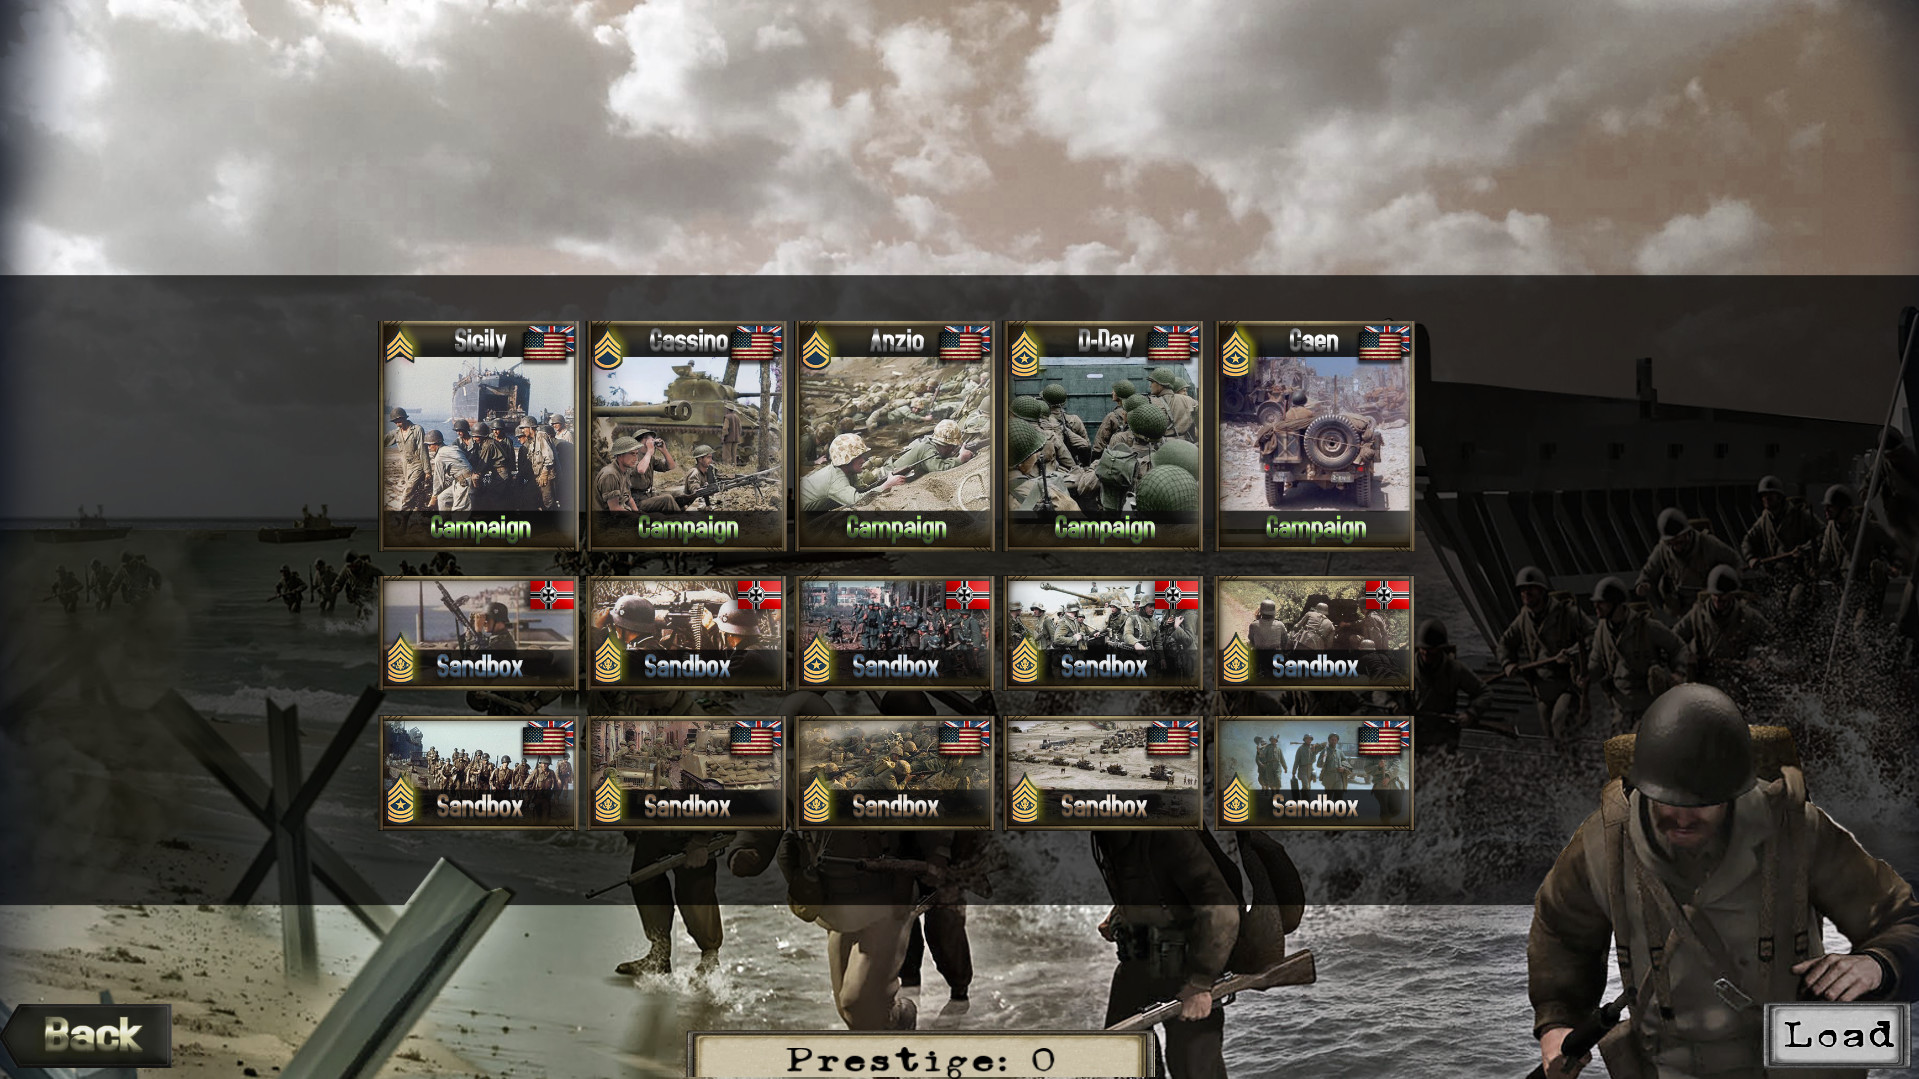 Frontline: Western Front Free Download